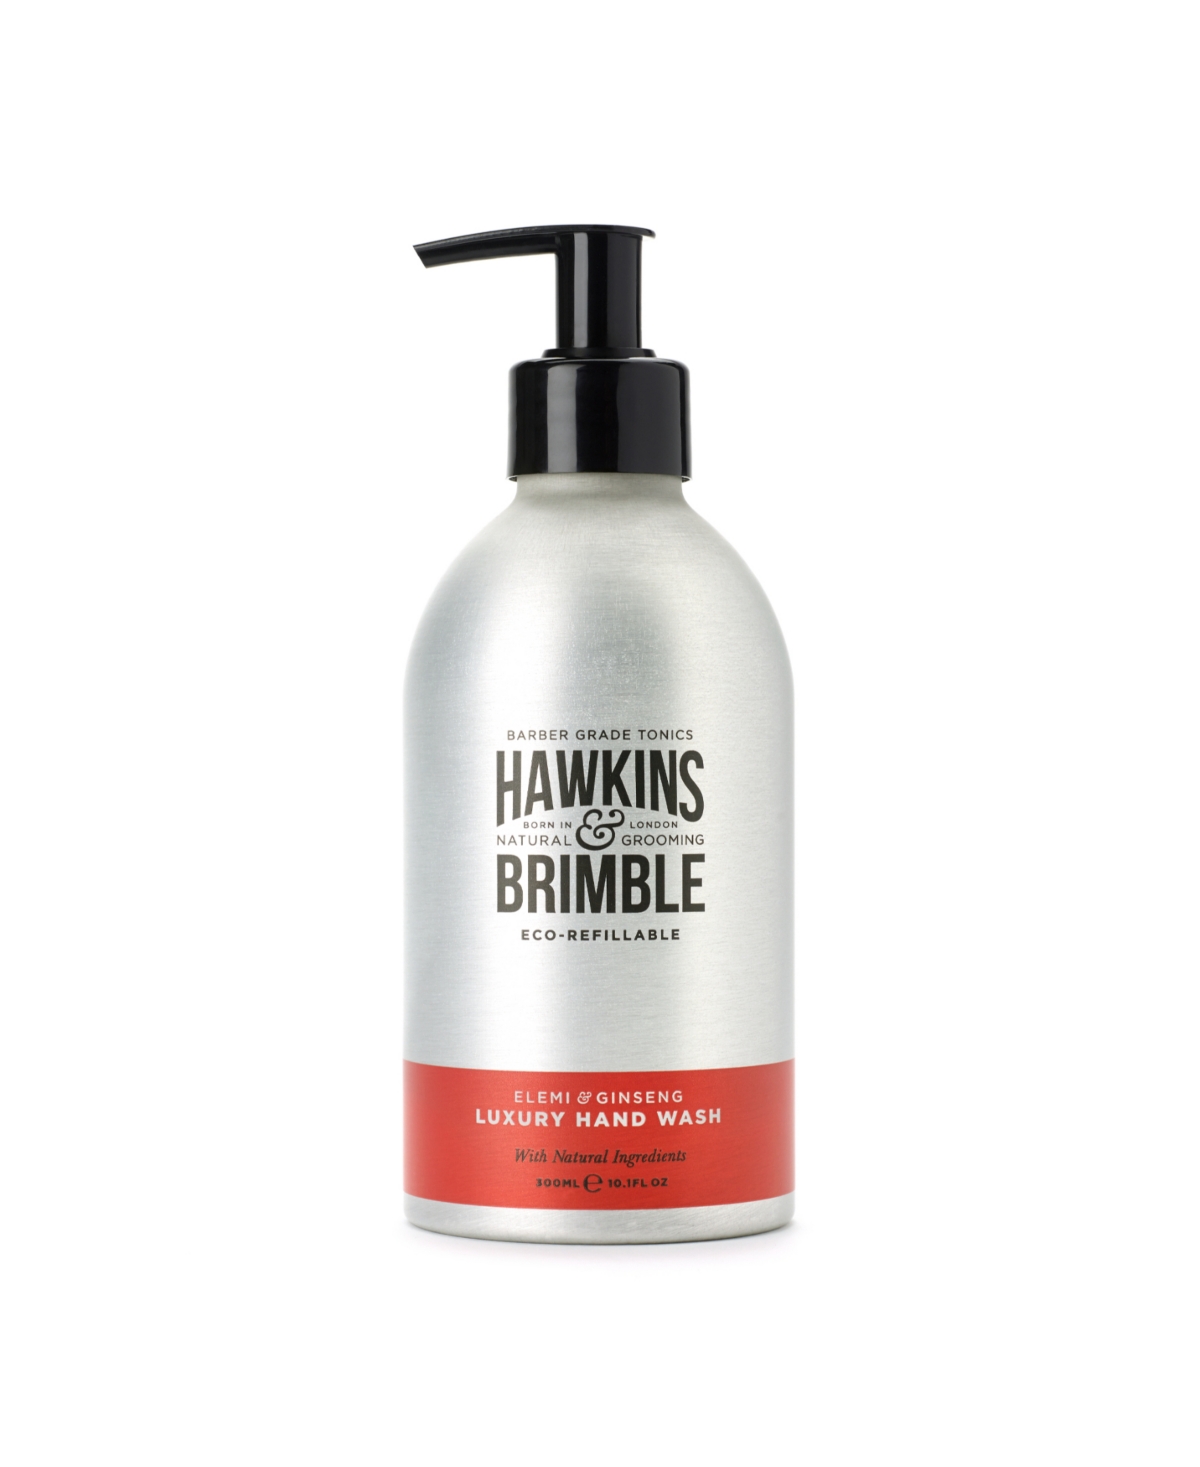 Hawkins and Brimble Cleansing Hand Wash Eco-Refillable, 10.1 fl oz - Silver